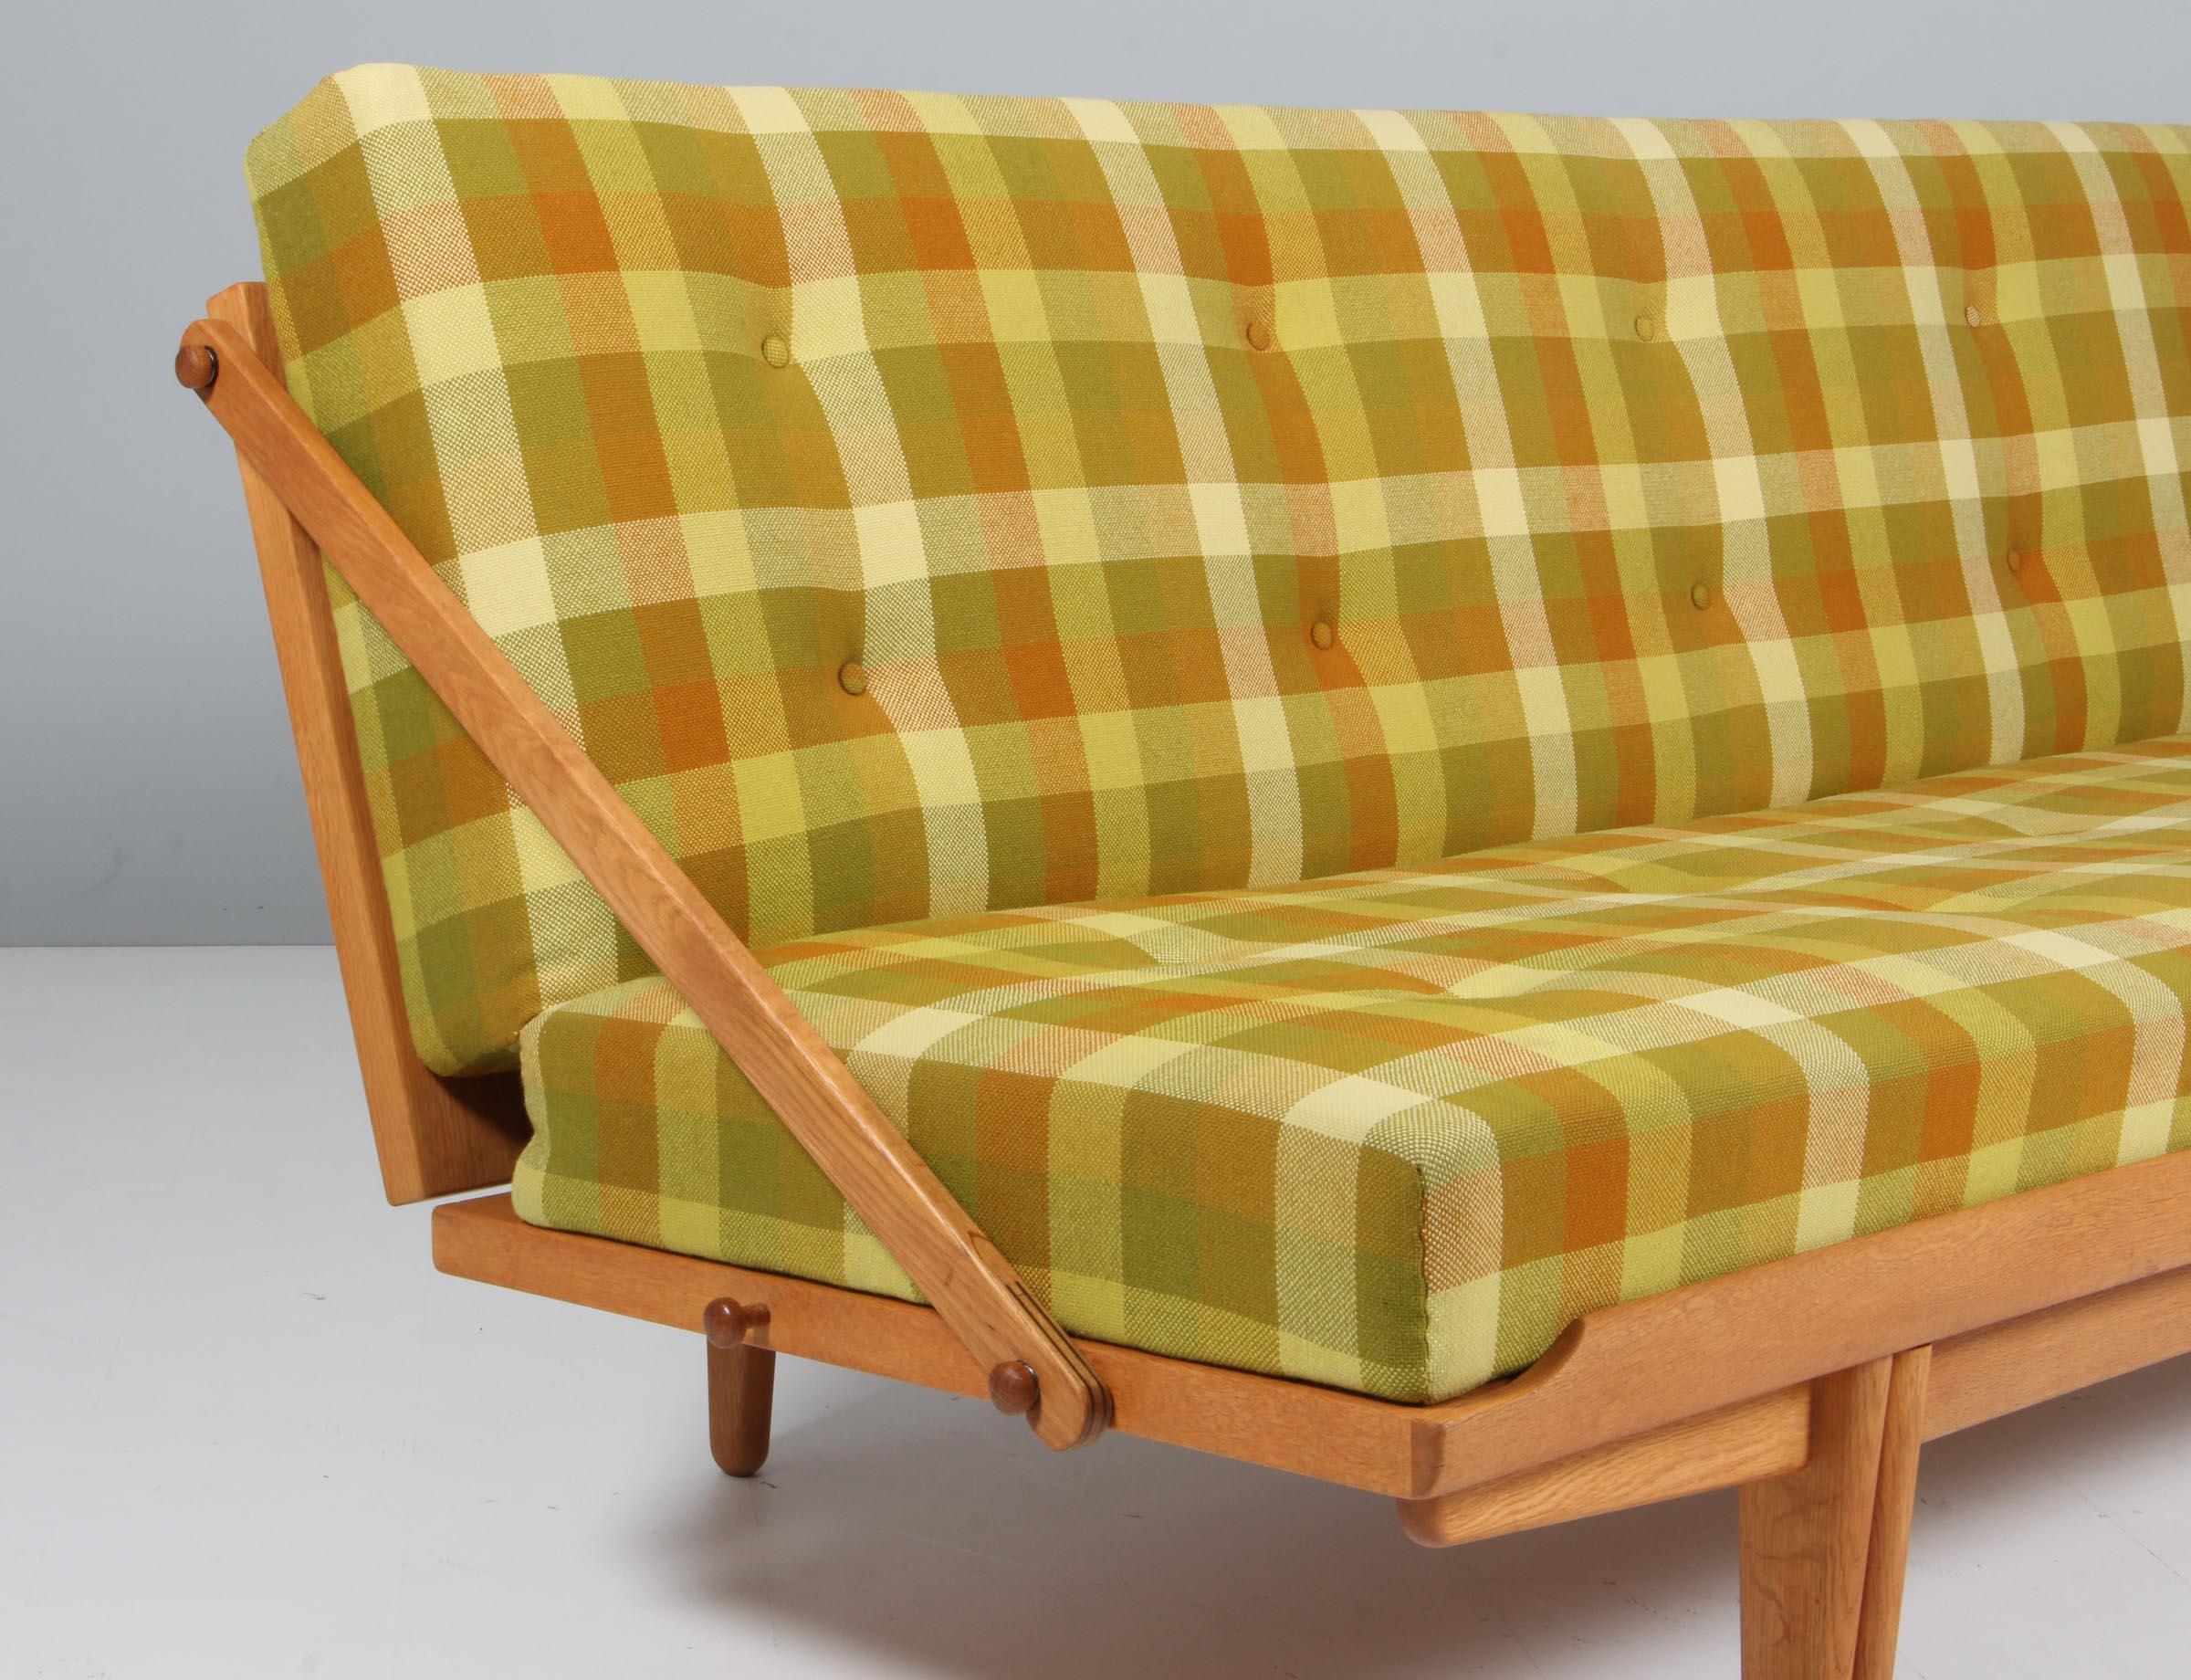 Mid-20th Century Poul Volther Diva Daybed Sofa, Denmark, 1959